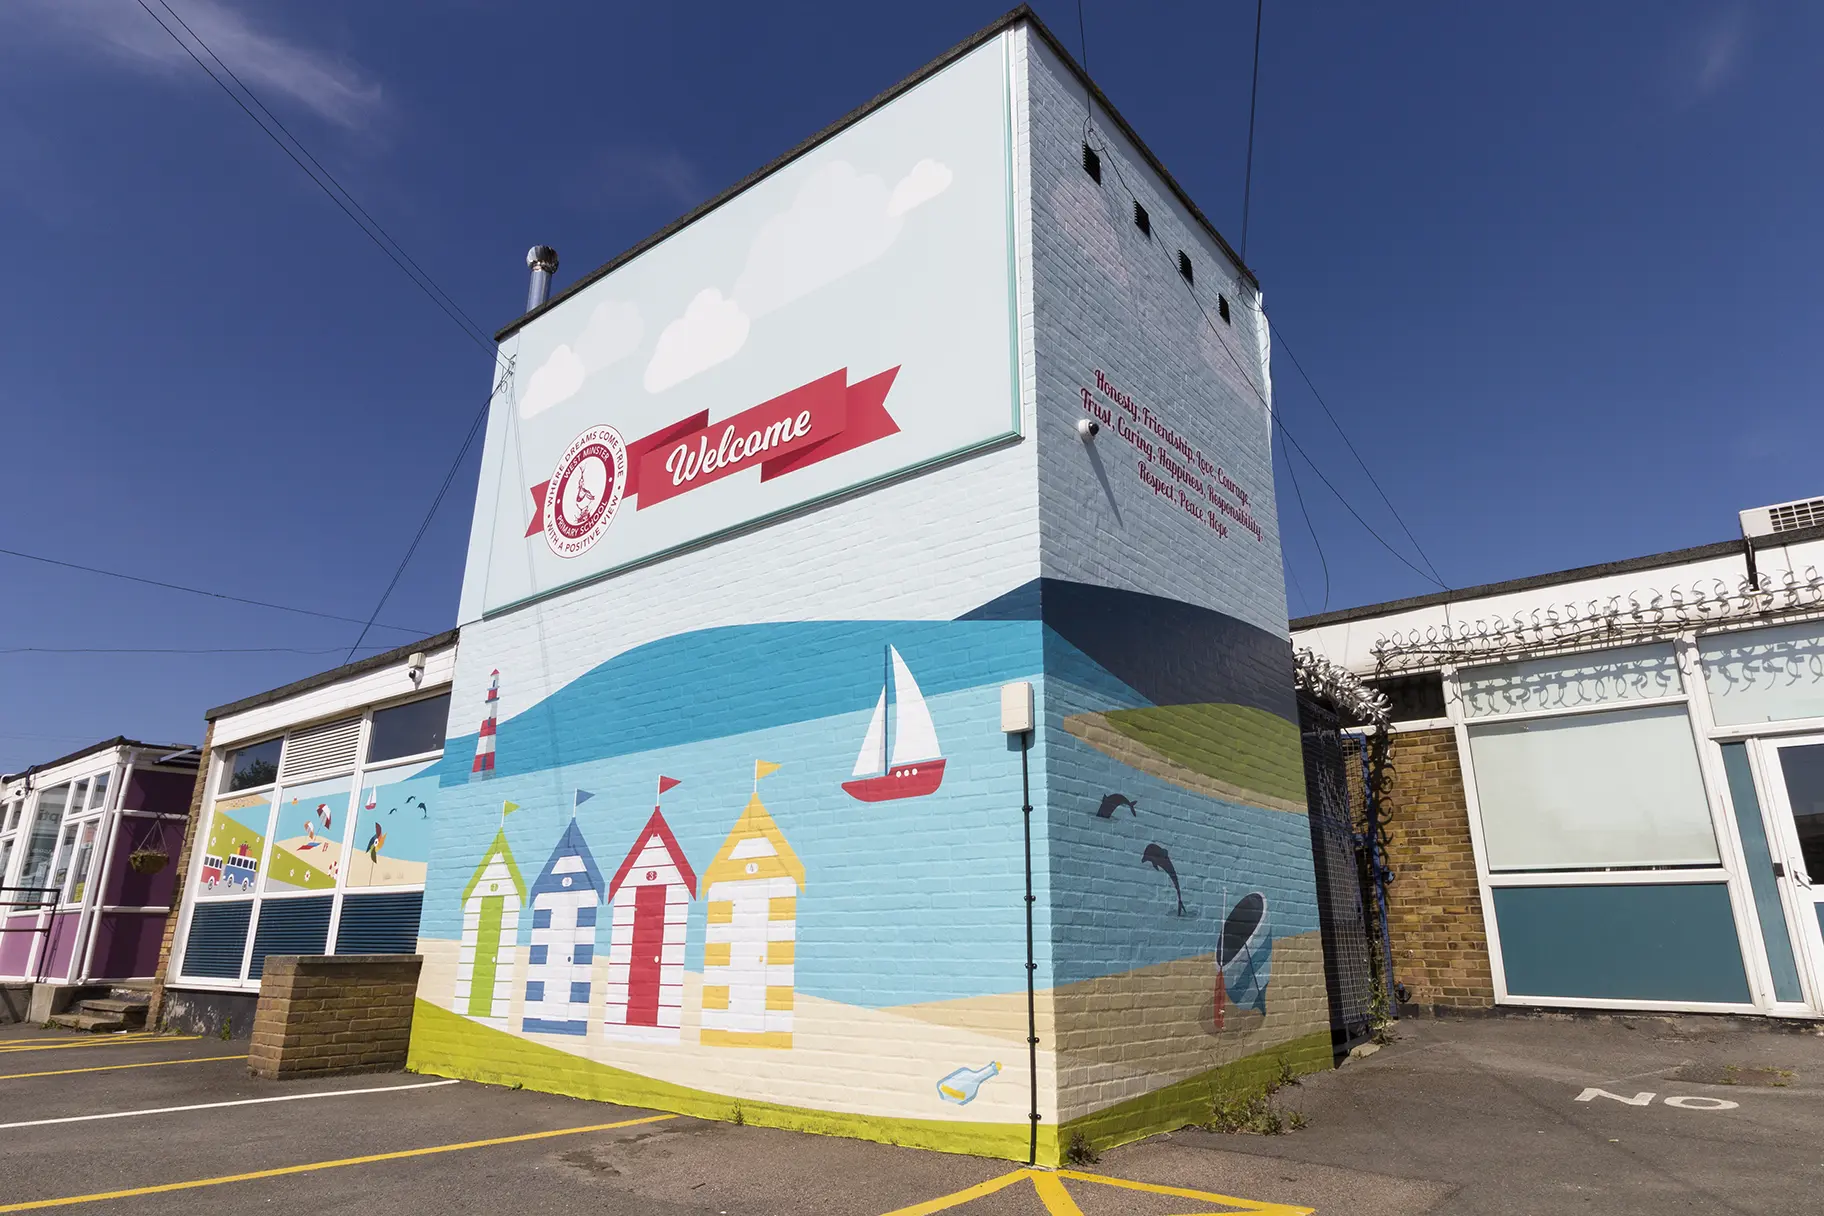 Primary Schools bespoke designed external welcome wall